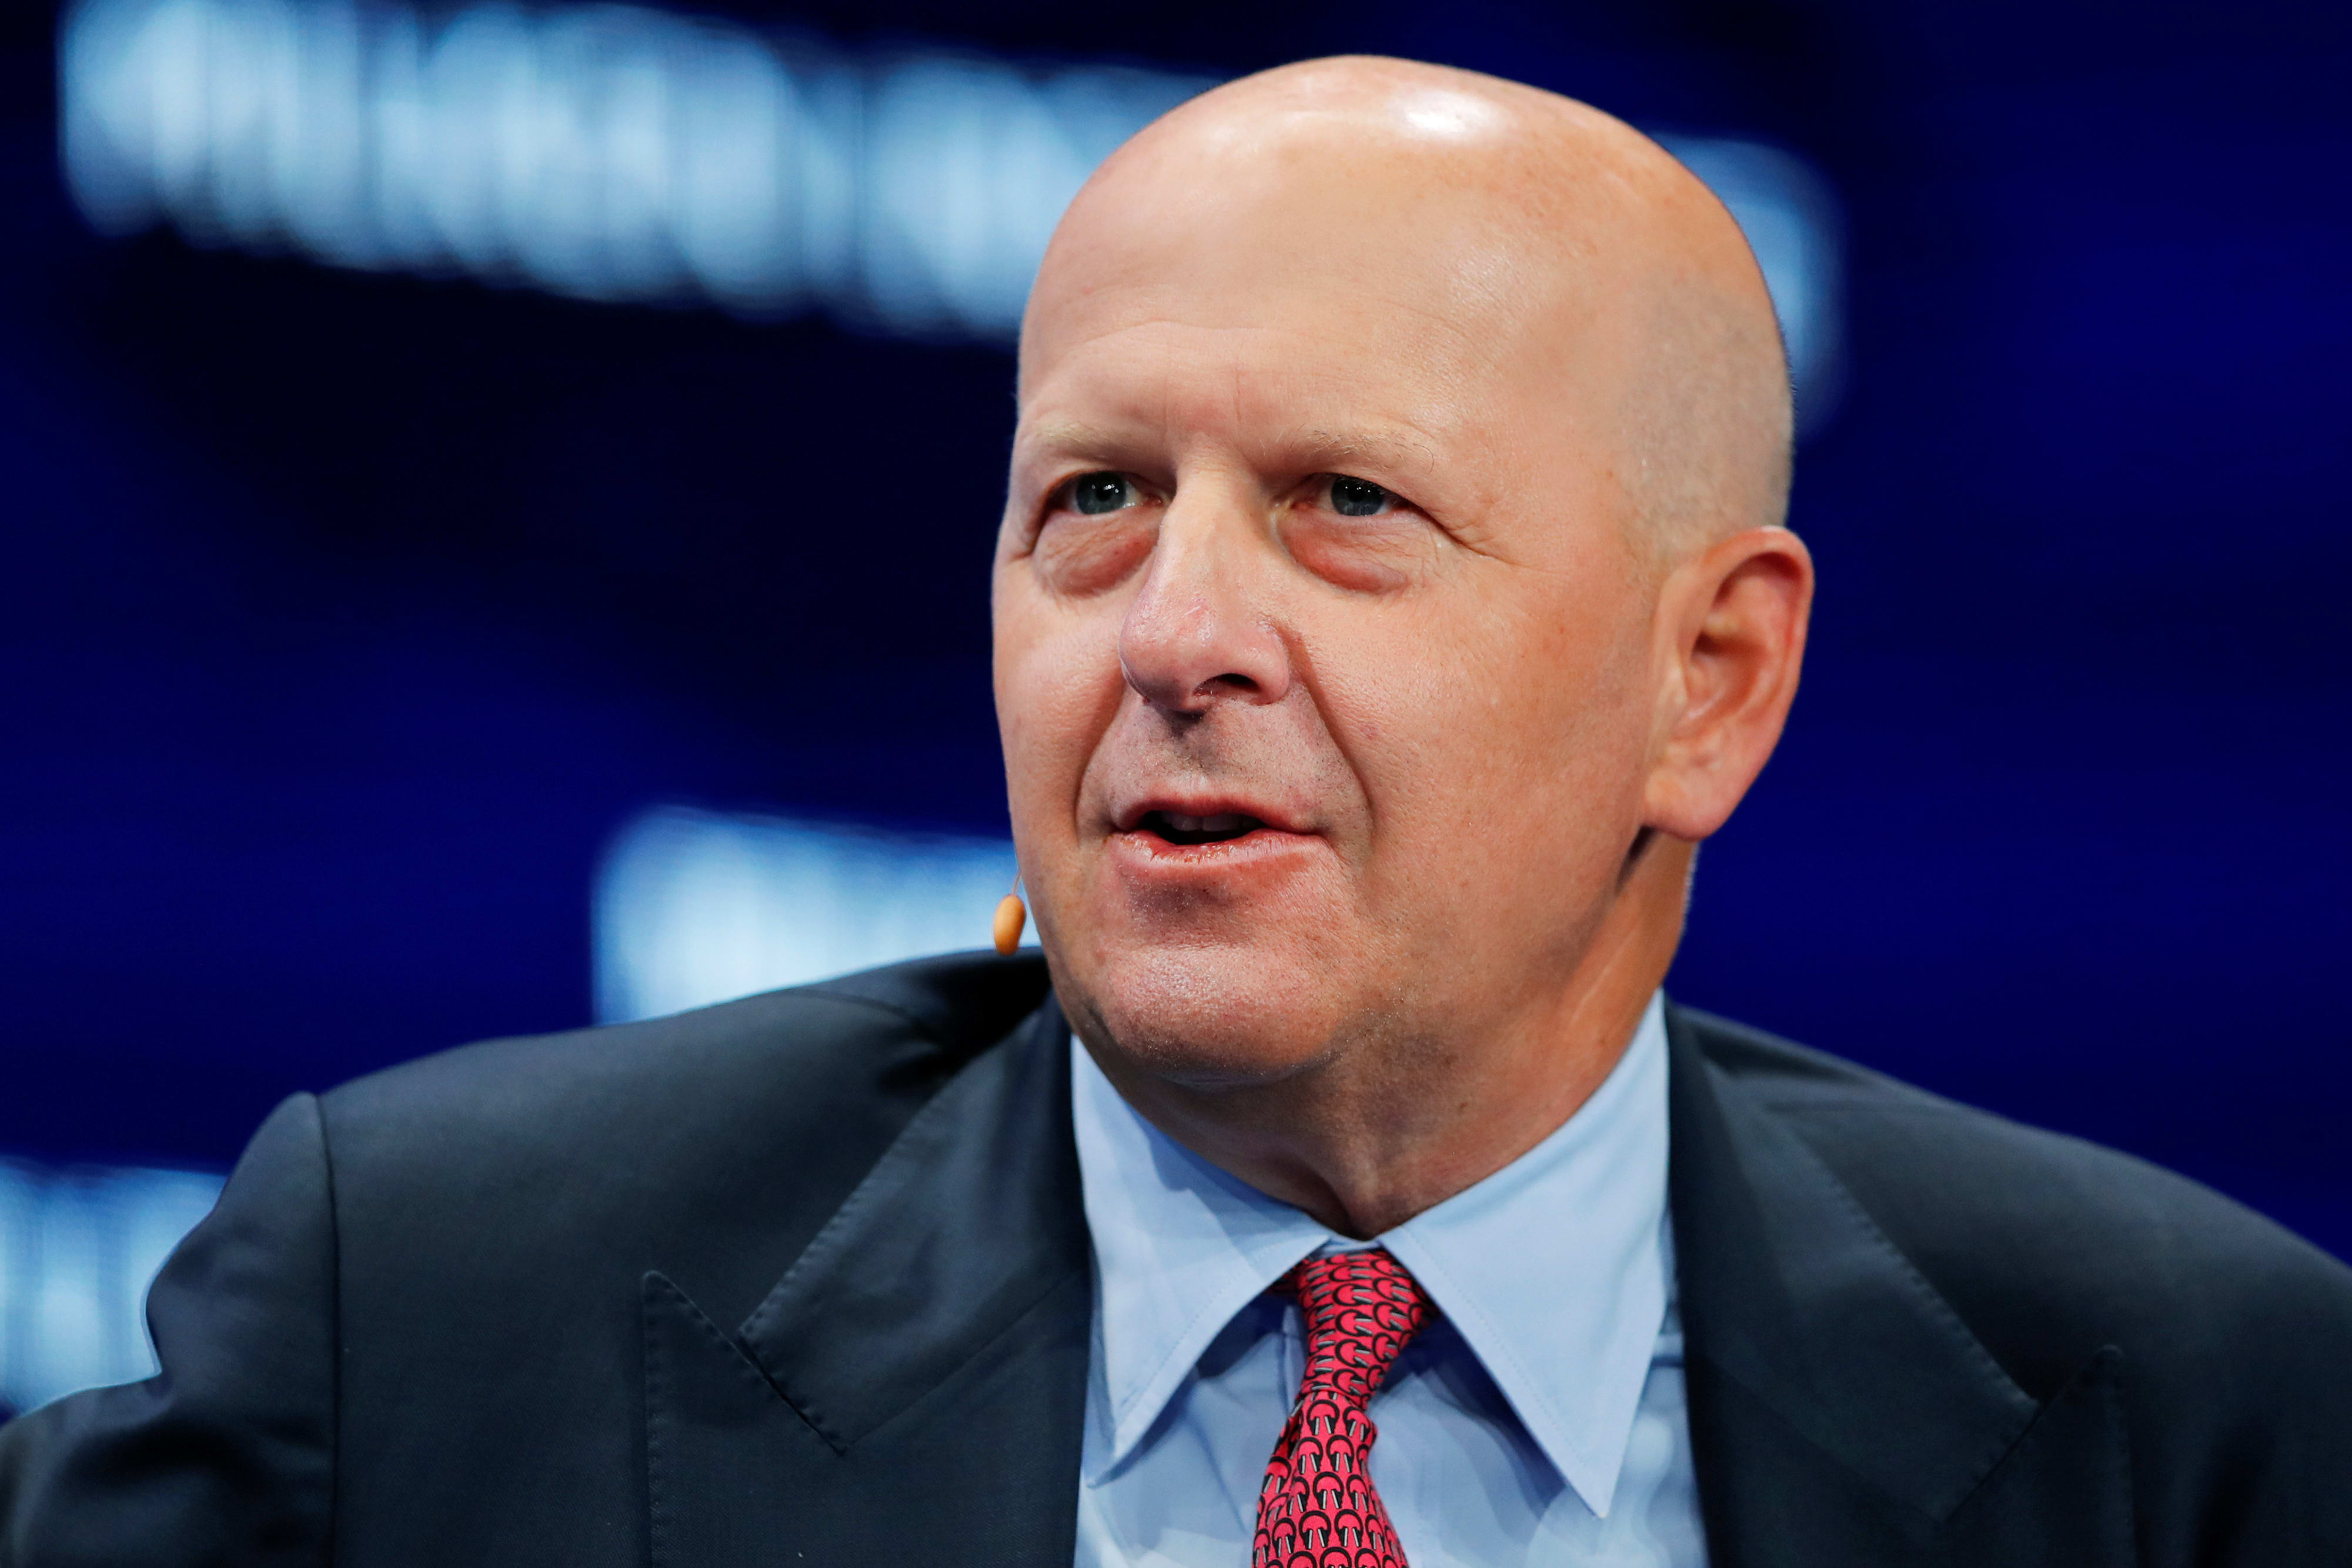 Goldman Sachs is set to report fourthquarter earnings — here’s what